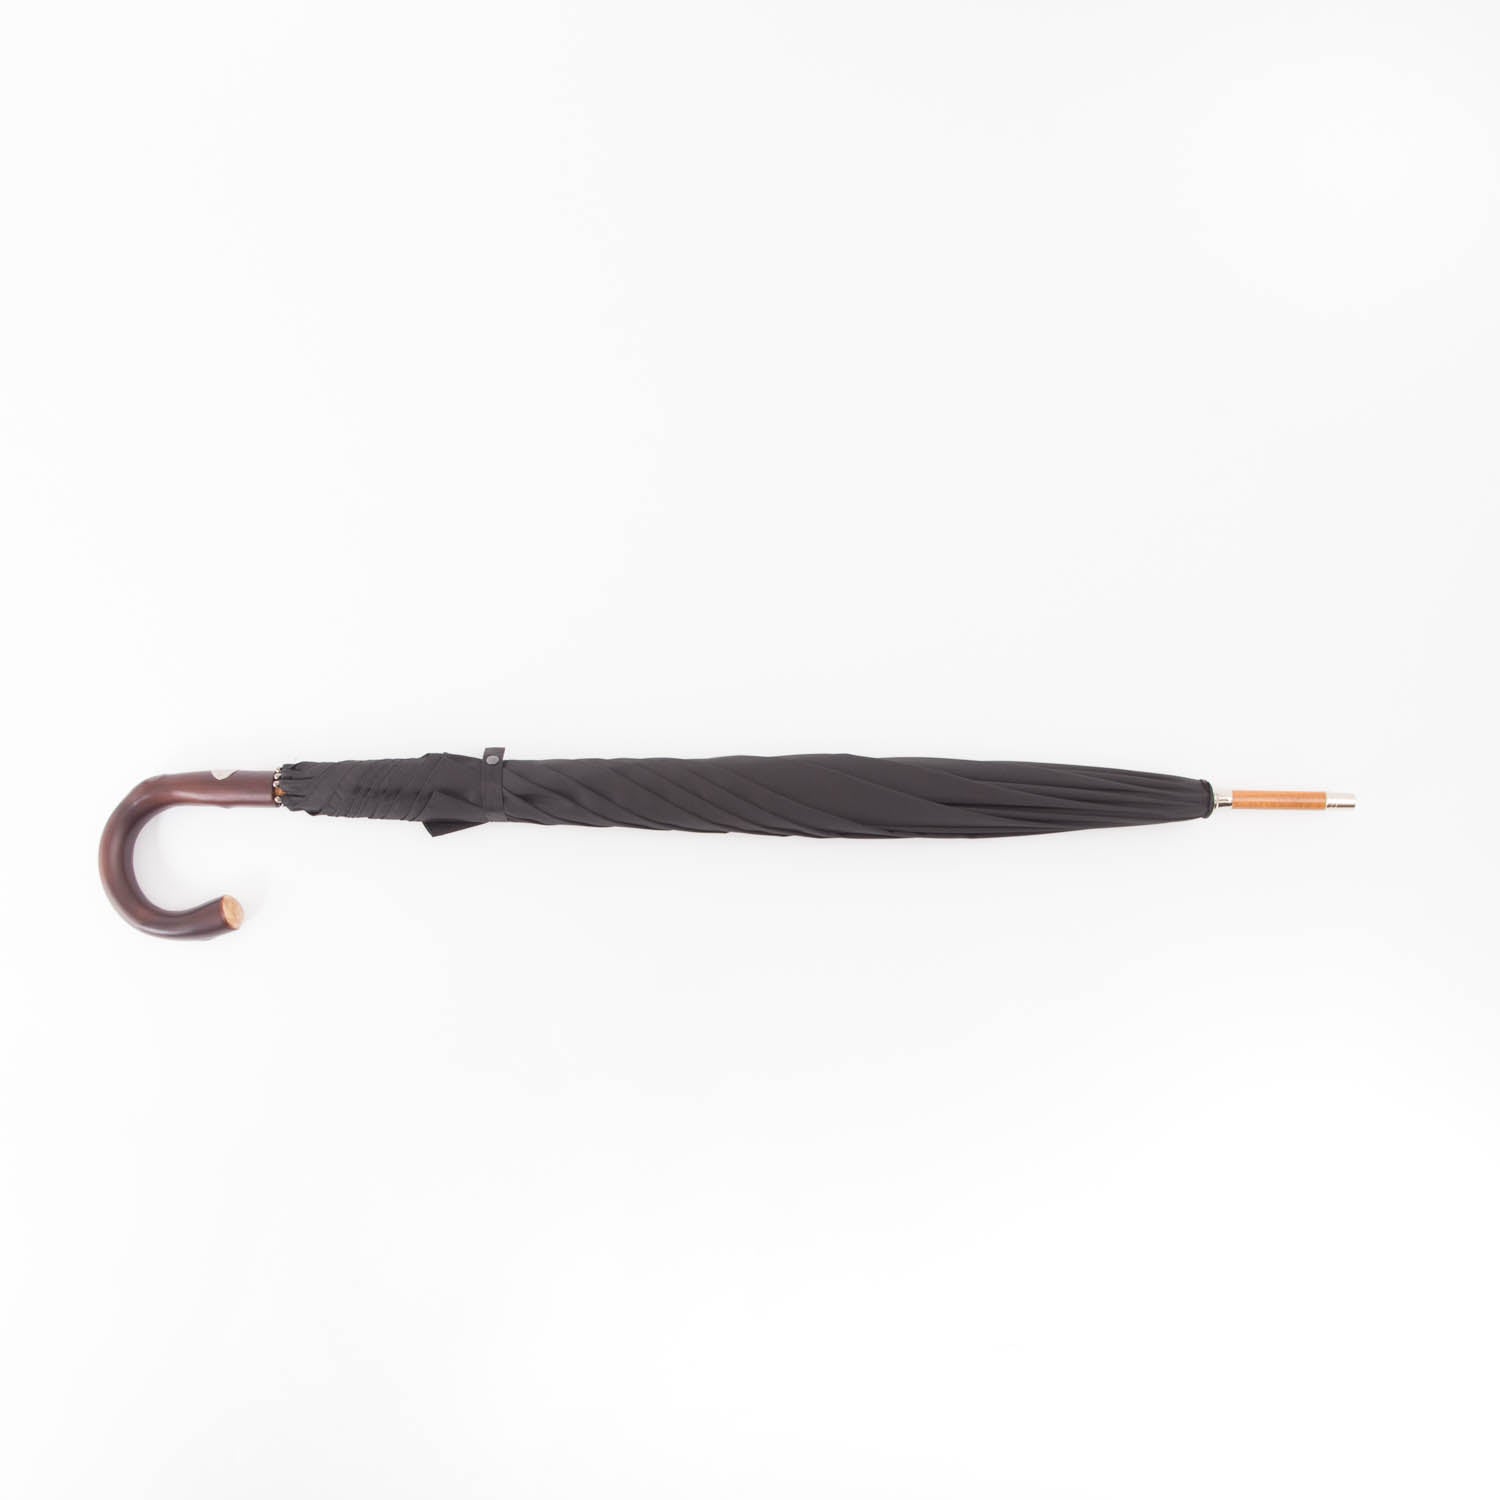 A black Doorman Umbrella with Chestnut Handle providing rain protection, displayed on a white background from KirbyAllison.com.